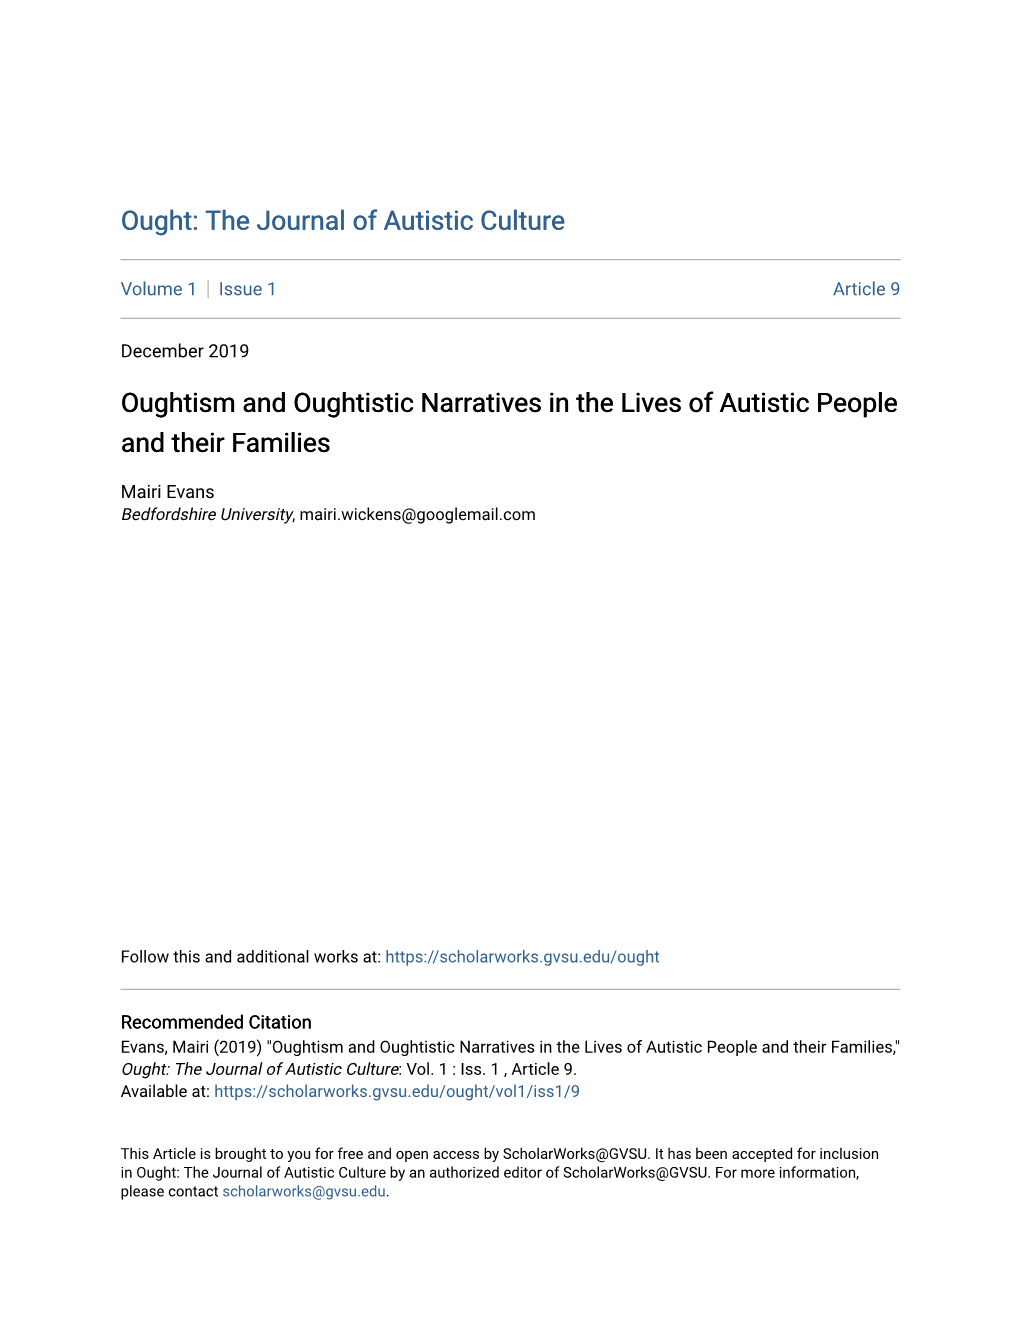 Oughtism and Oughtistic Narratives in the Lives of Autistic People and Their Families